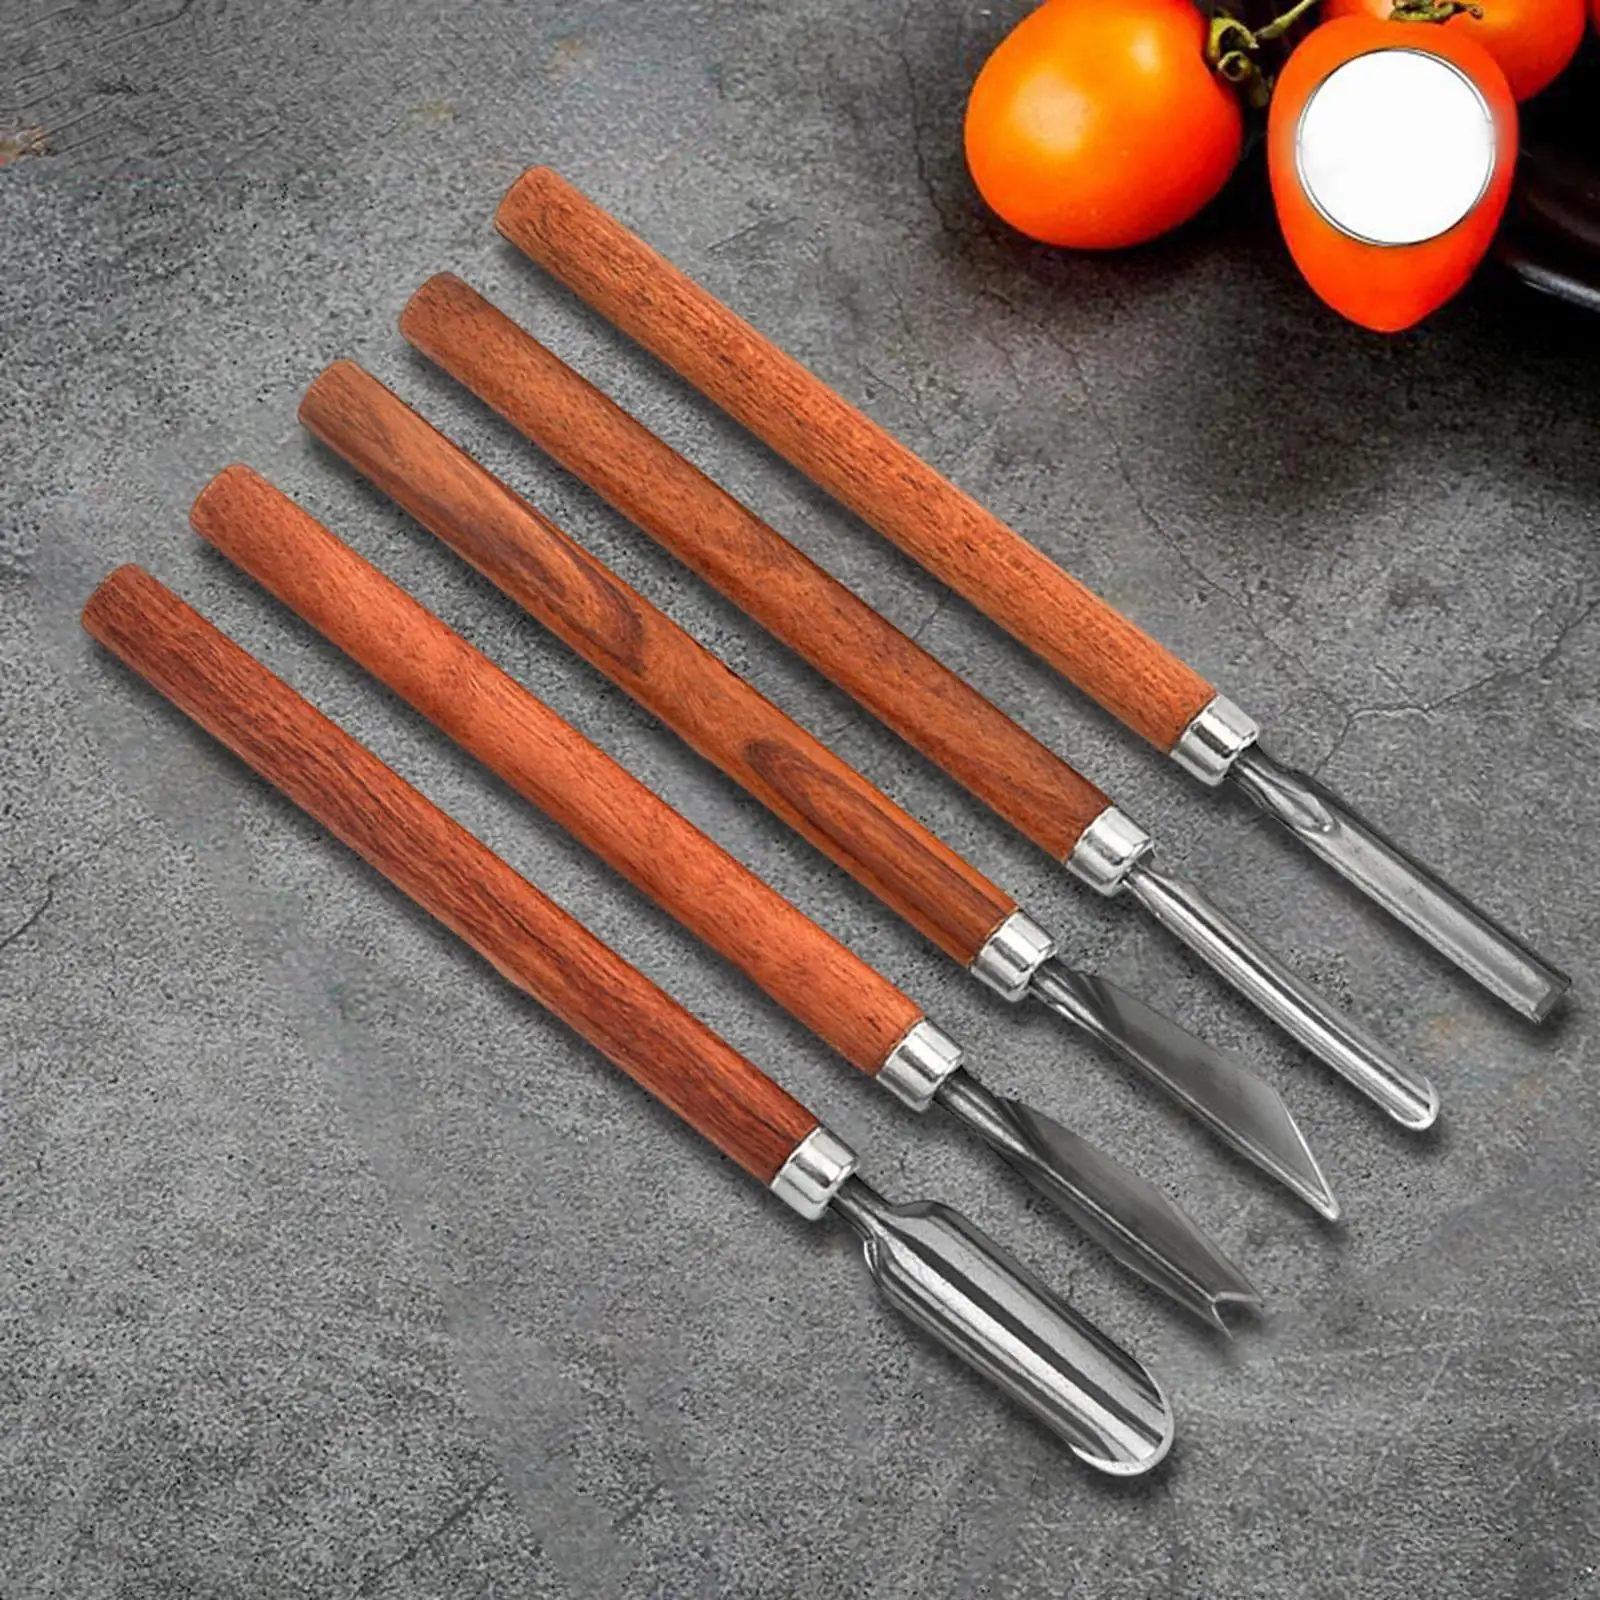 Multifunctional Carving Knife Sharp Culinary Carving Tool Food Garnishing Sculpting Modeling Cutting for Kitchen Home Restaurant